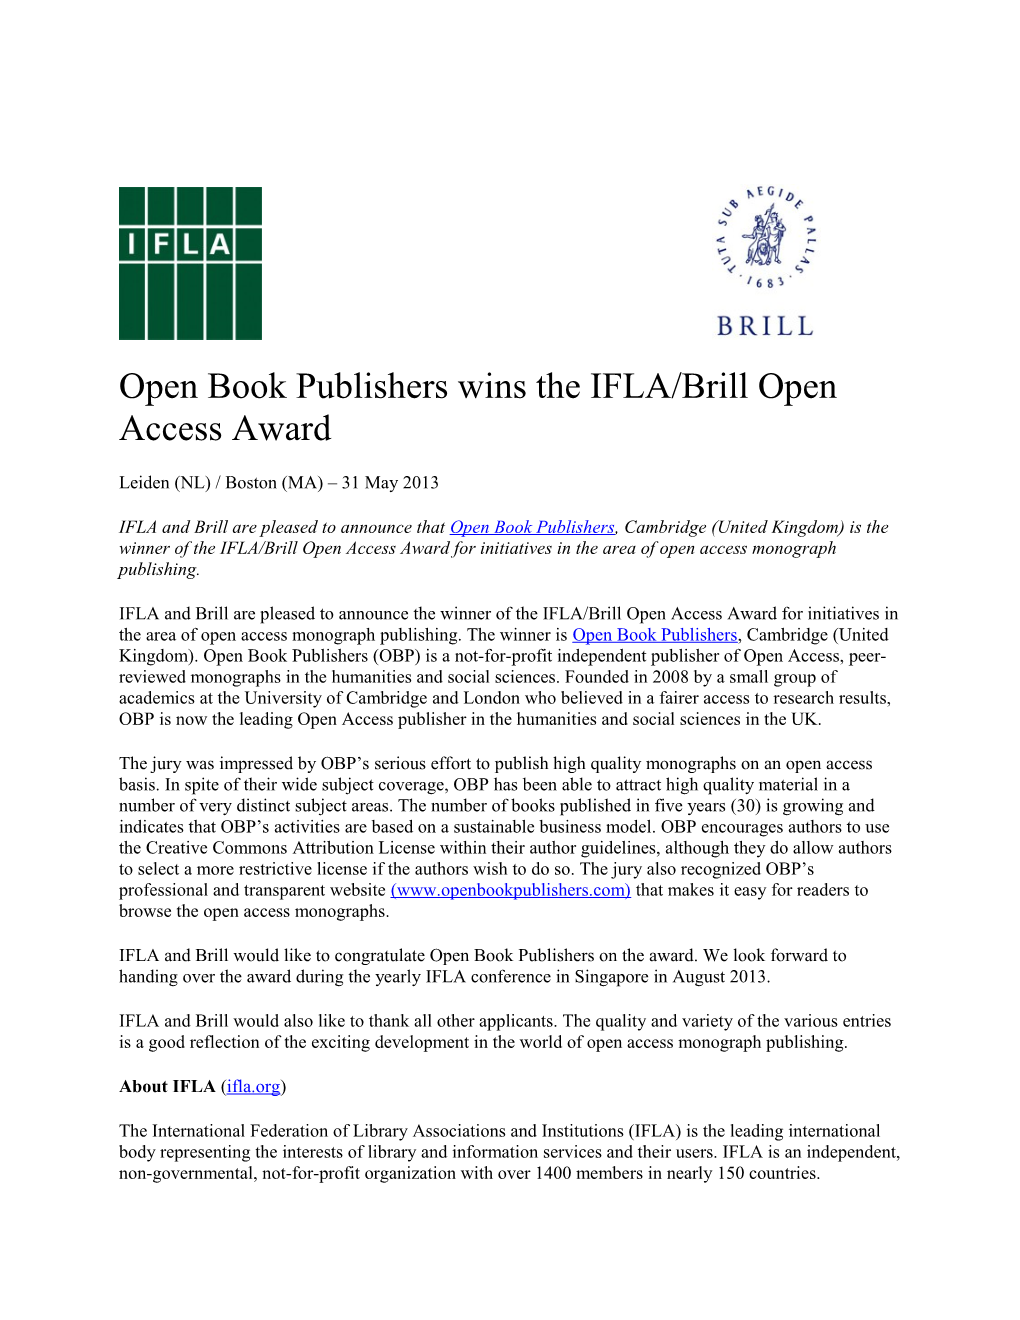 Open Book Publishers Wins the IFLA/Brill Open Access Award